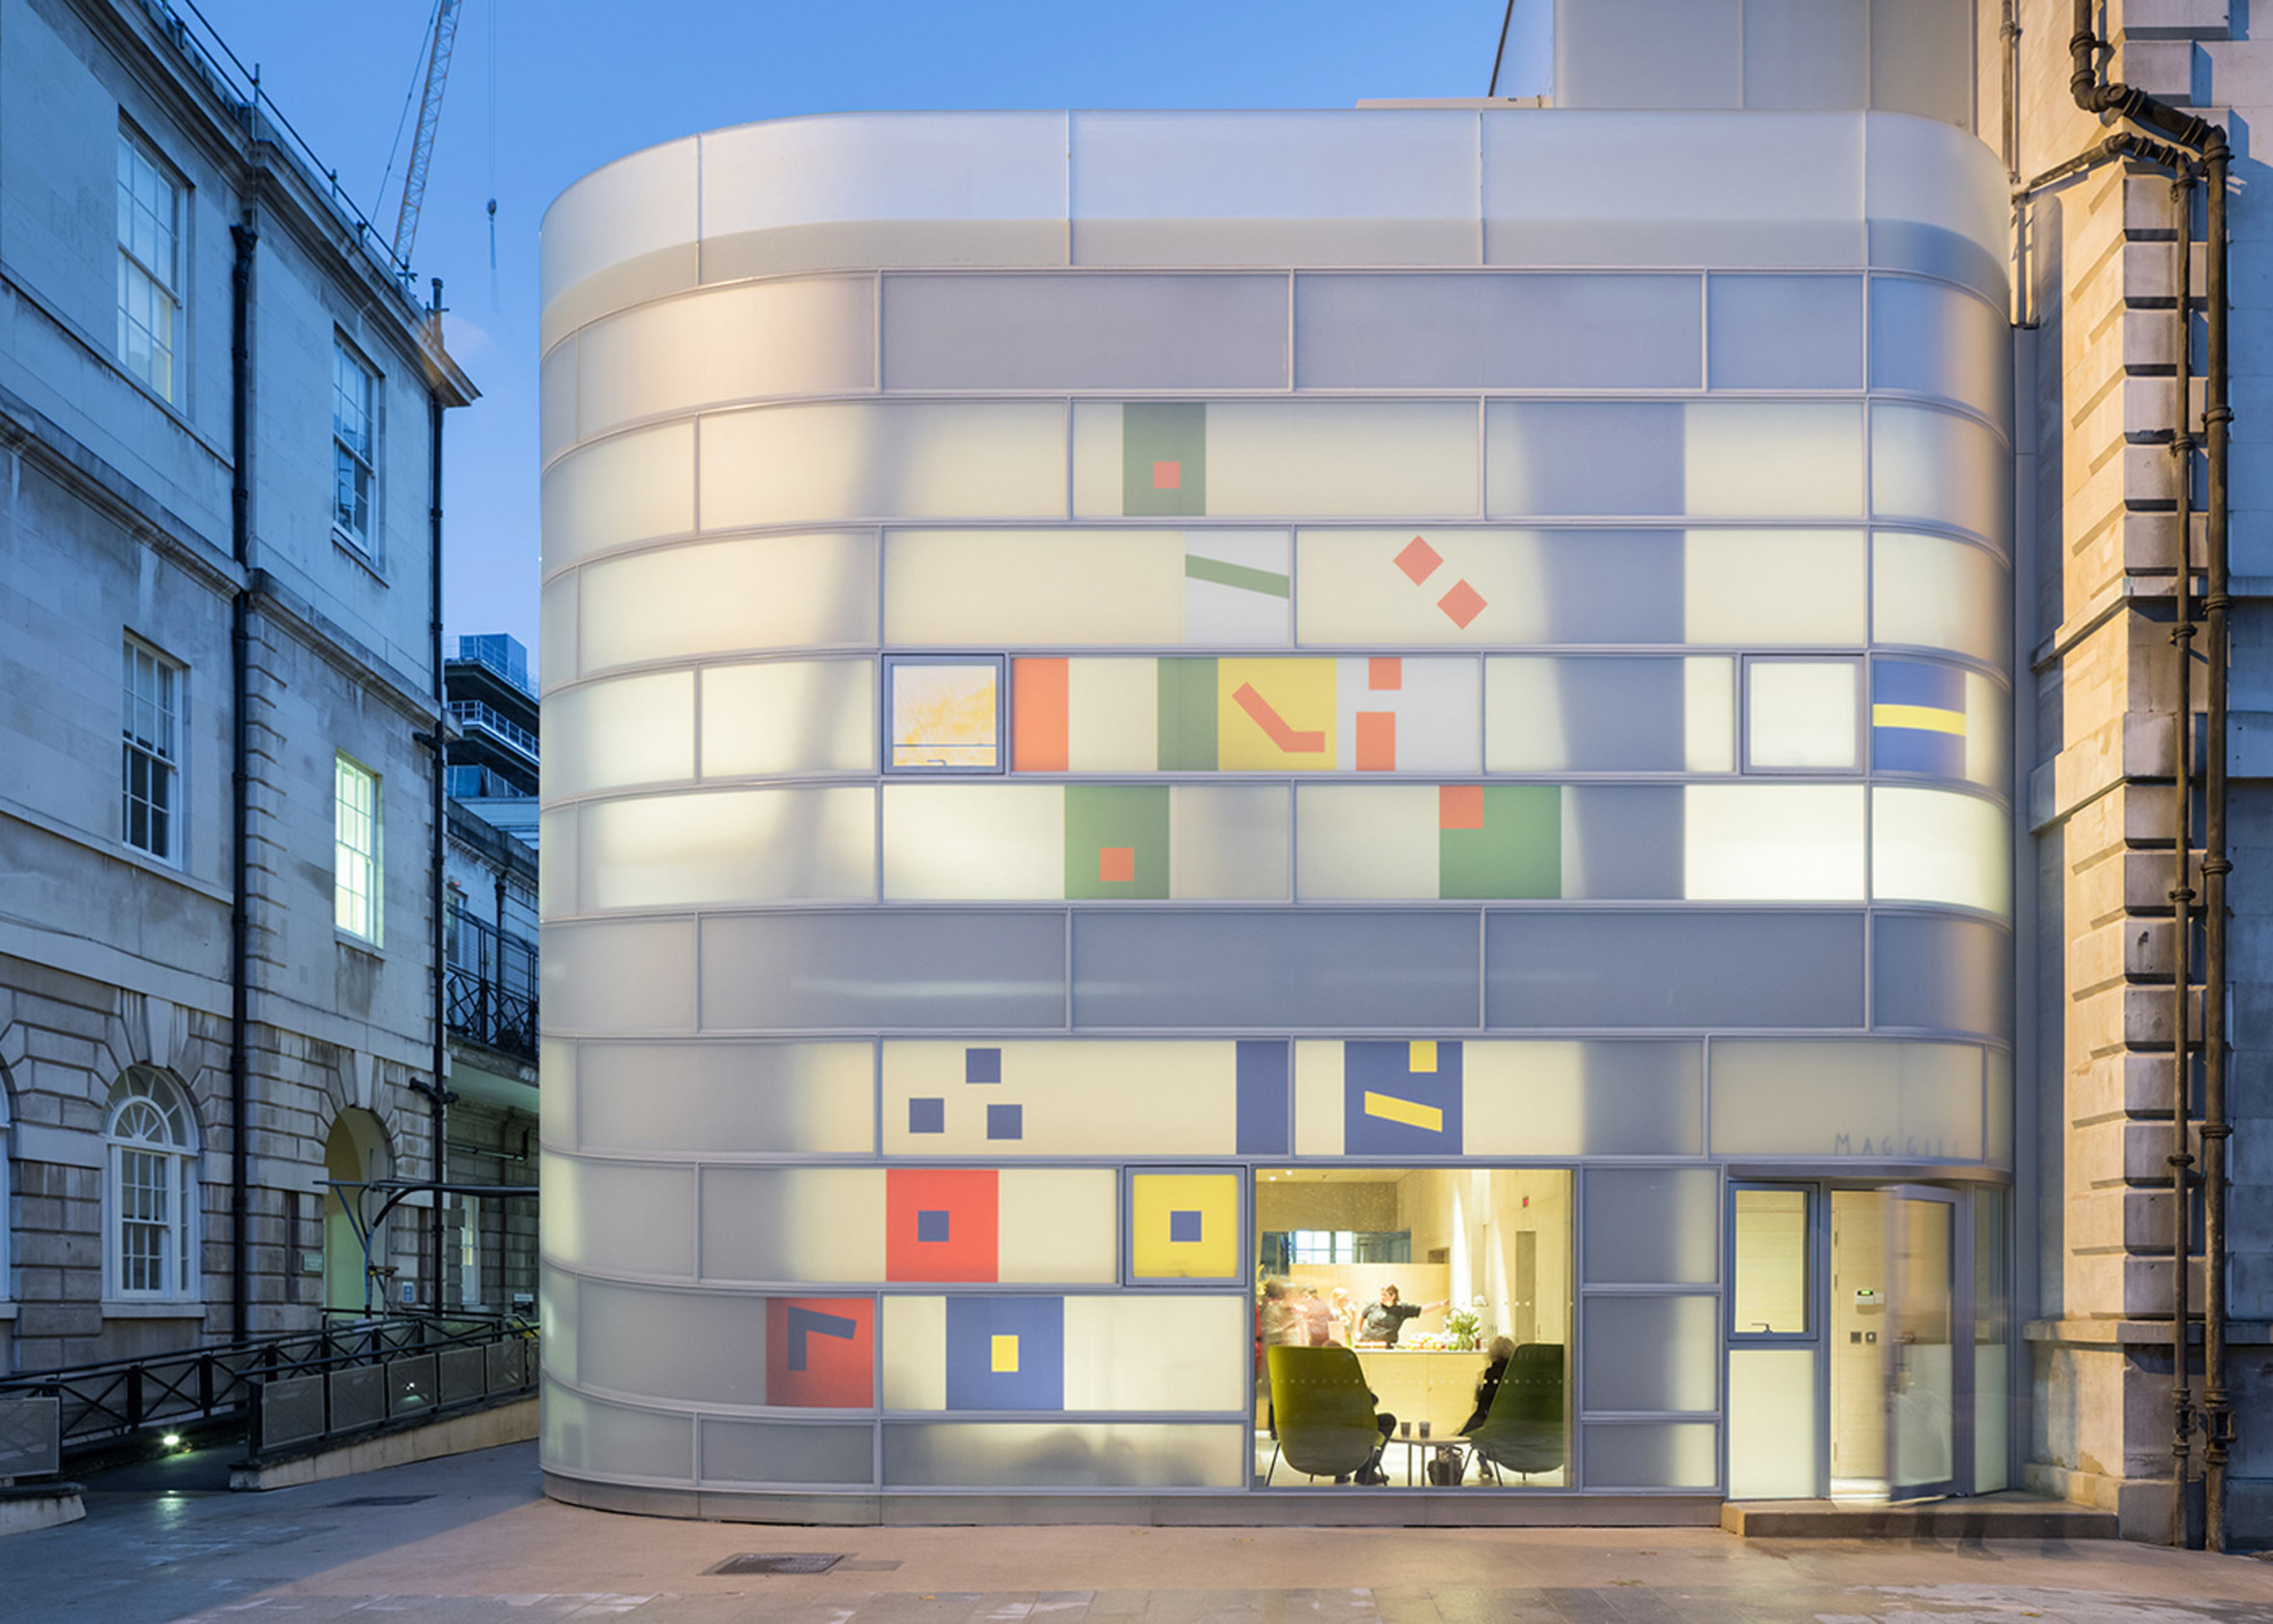 Dezeen Awards architecture winners: Maggie's Centre Barts by Steven Holl Architects